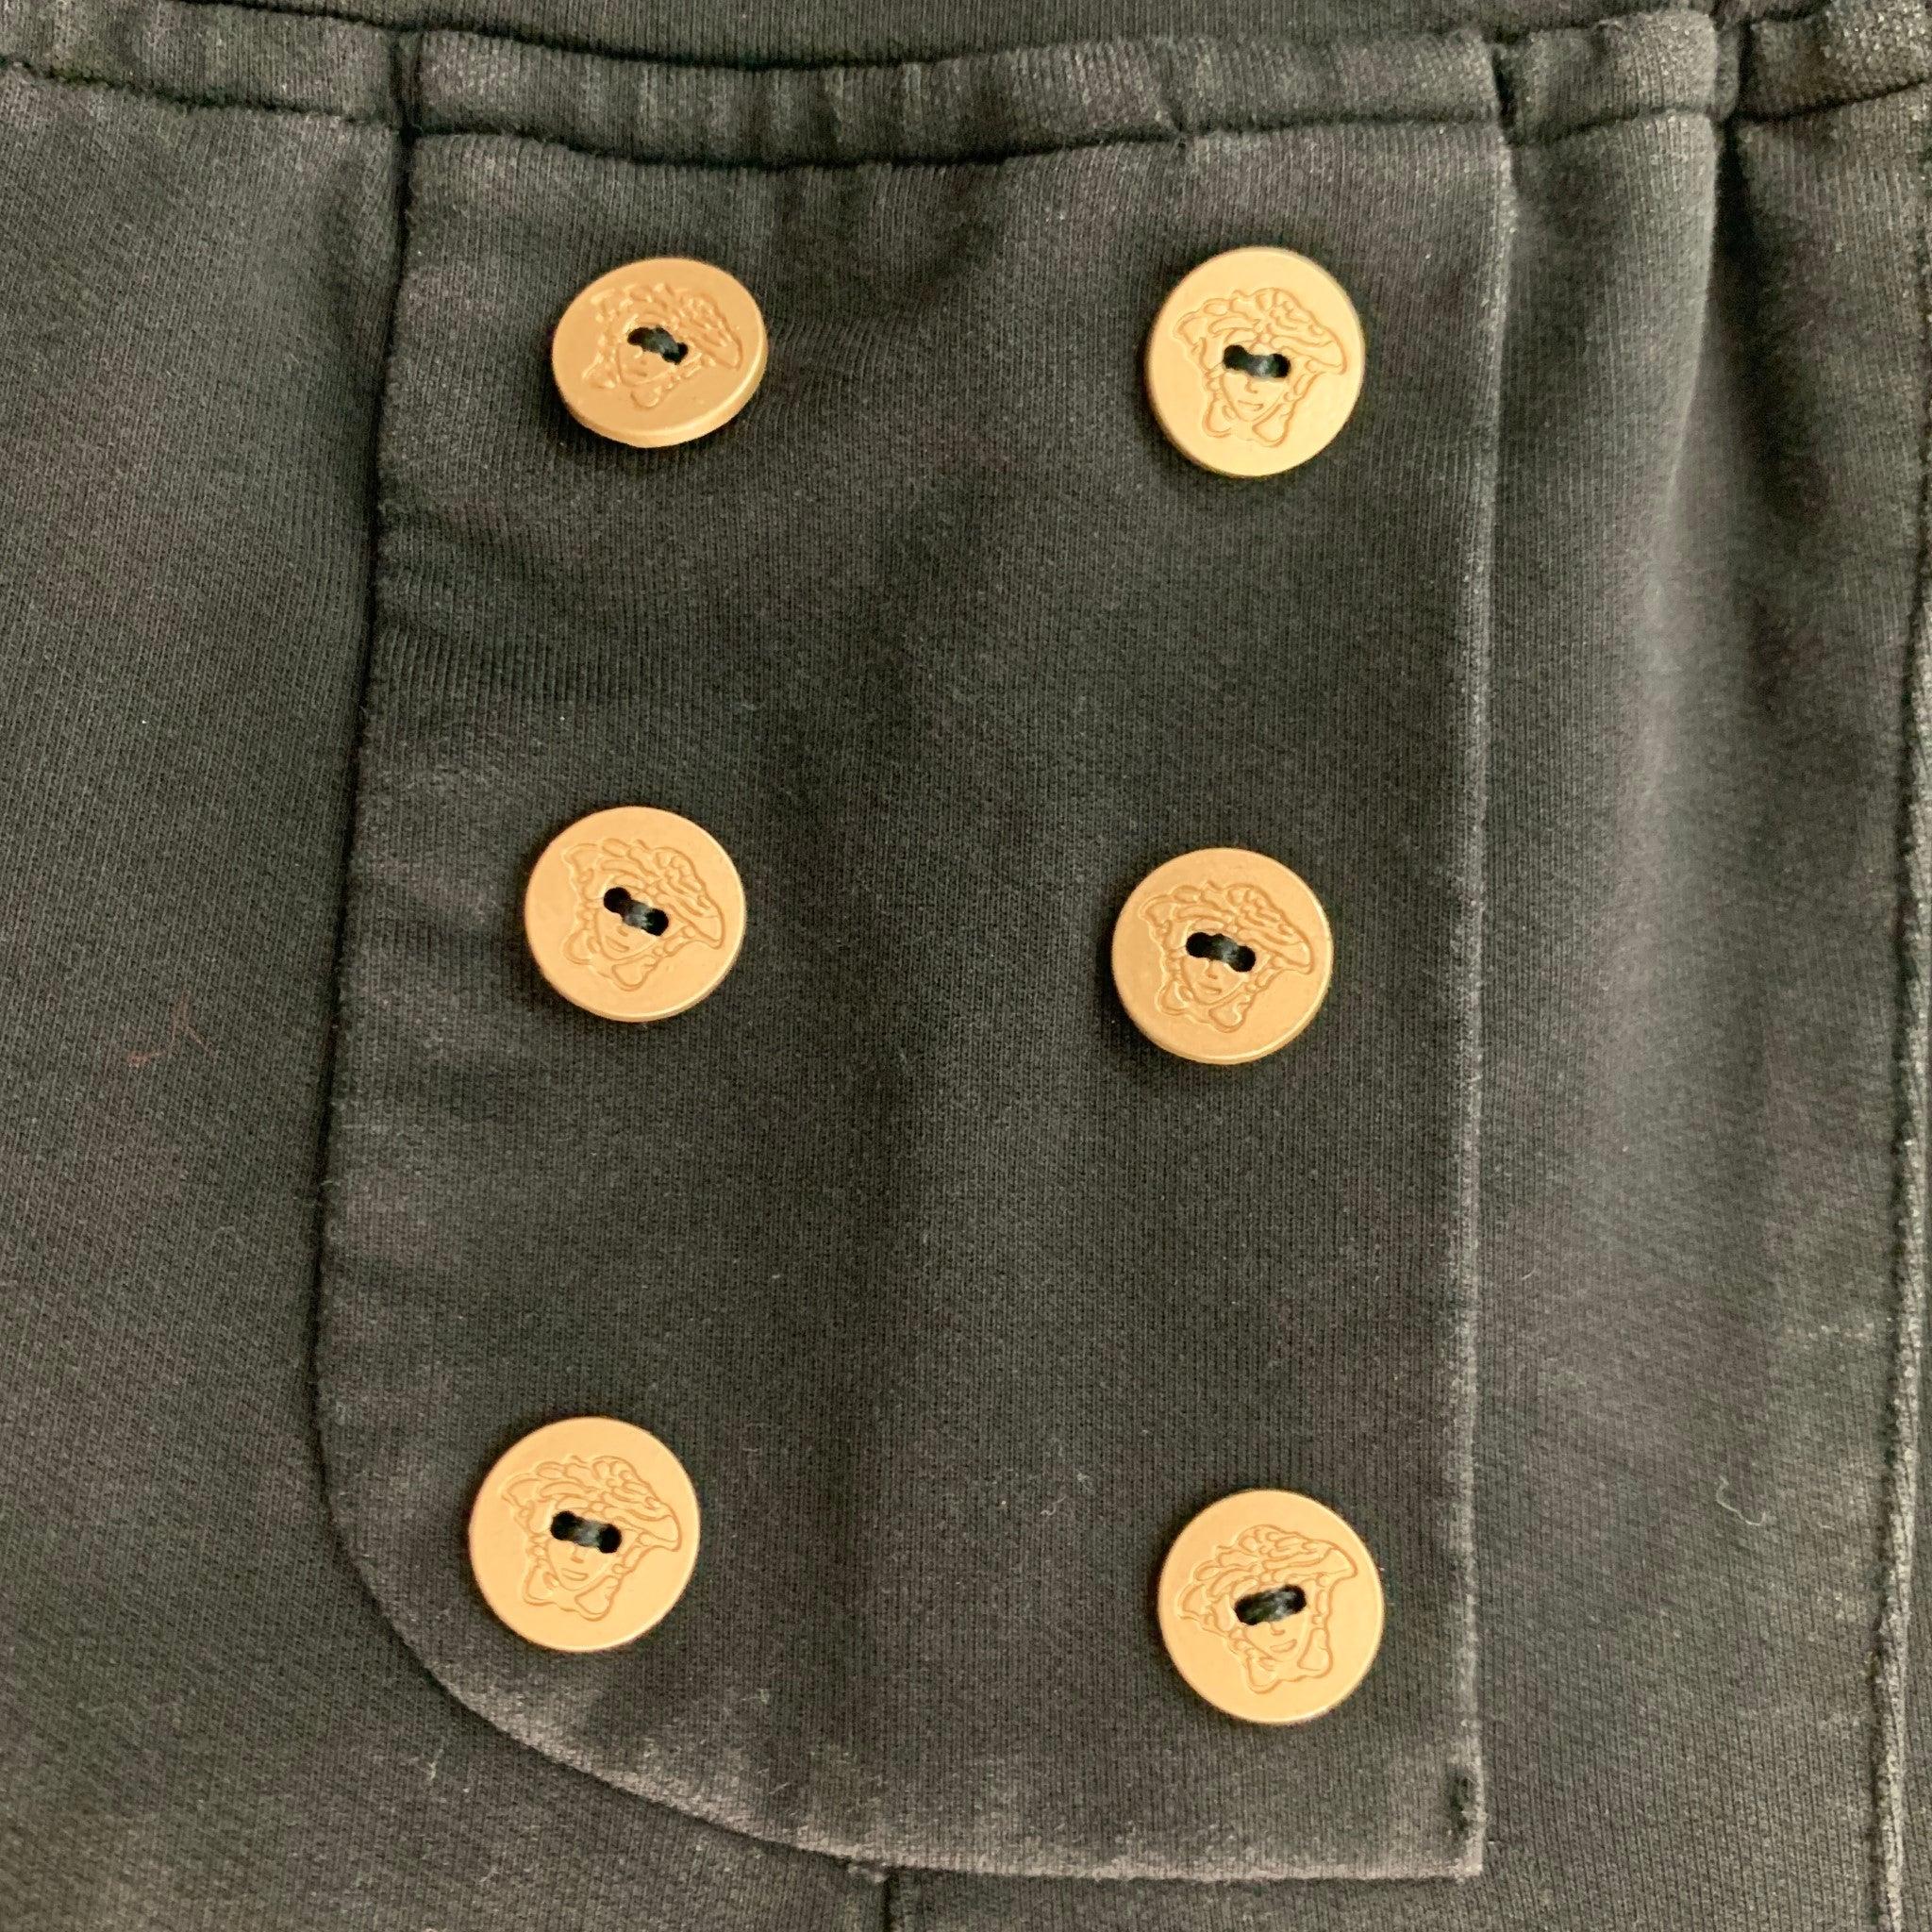 VERSACE shorts comes in a black cotton jersey knit material featuring medusa gold buttons detail, drawstring and an elastic waist. Very Good Pre-Owned Condition. Moderate color fading. 

Marked:   L 

Measurements: 
  Waist: 27 inches Rise: 8.5